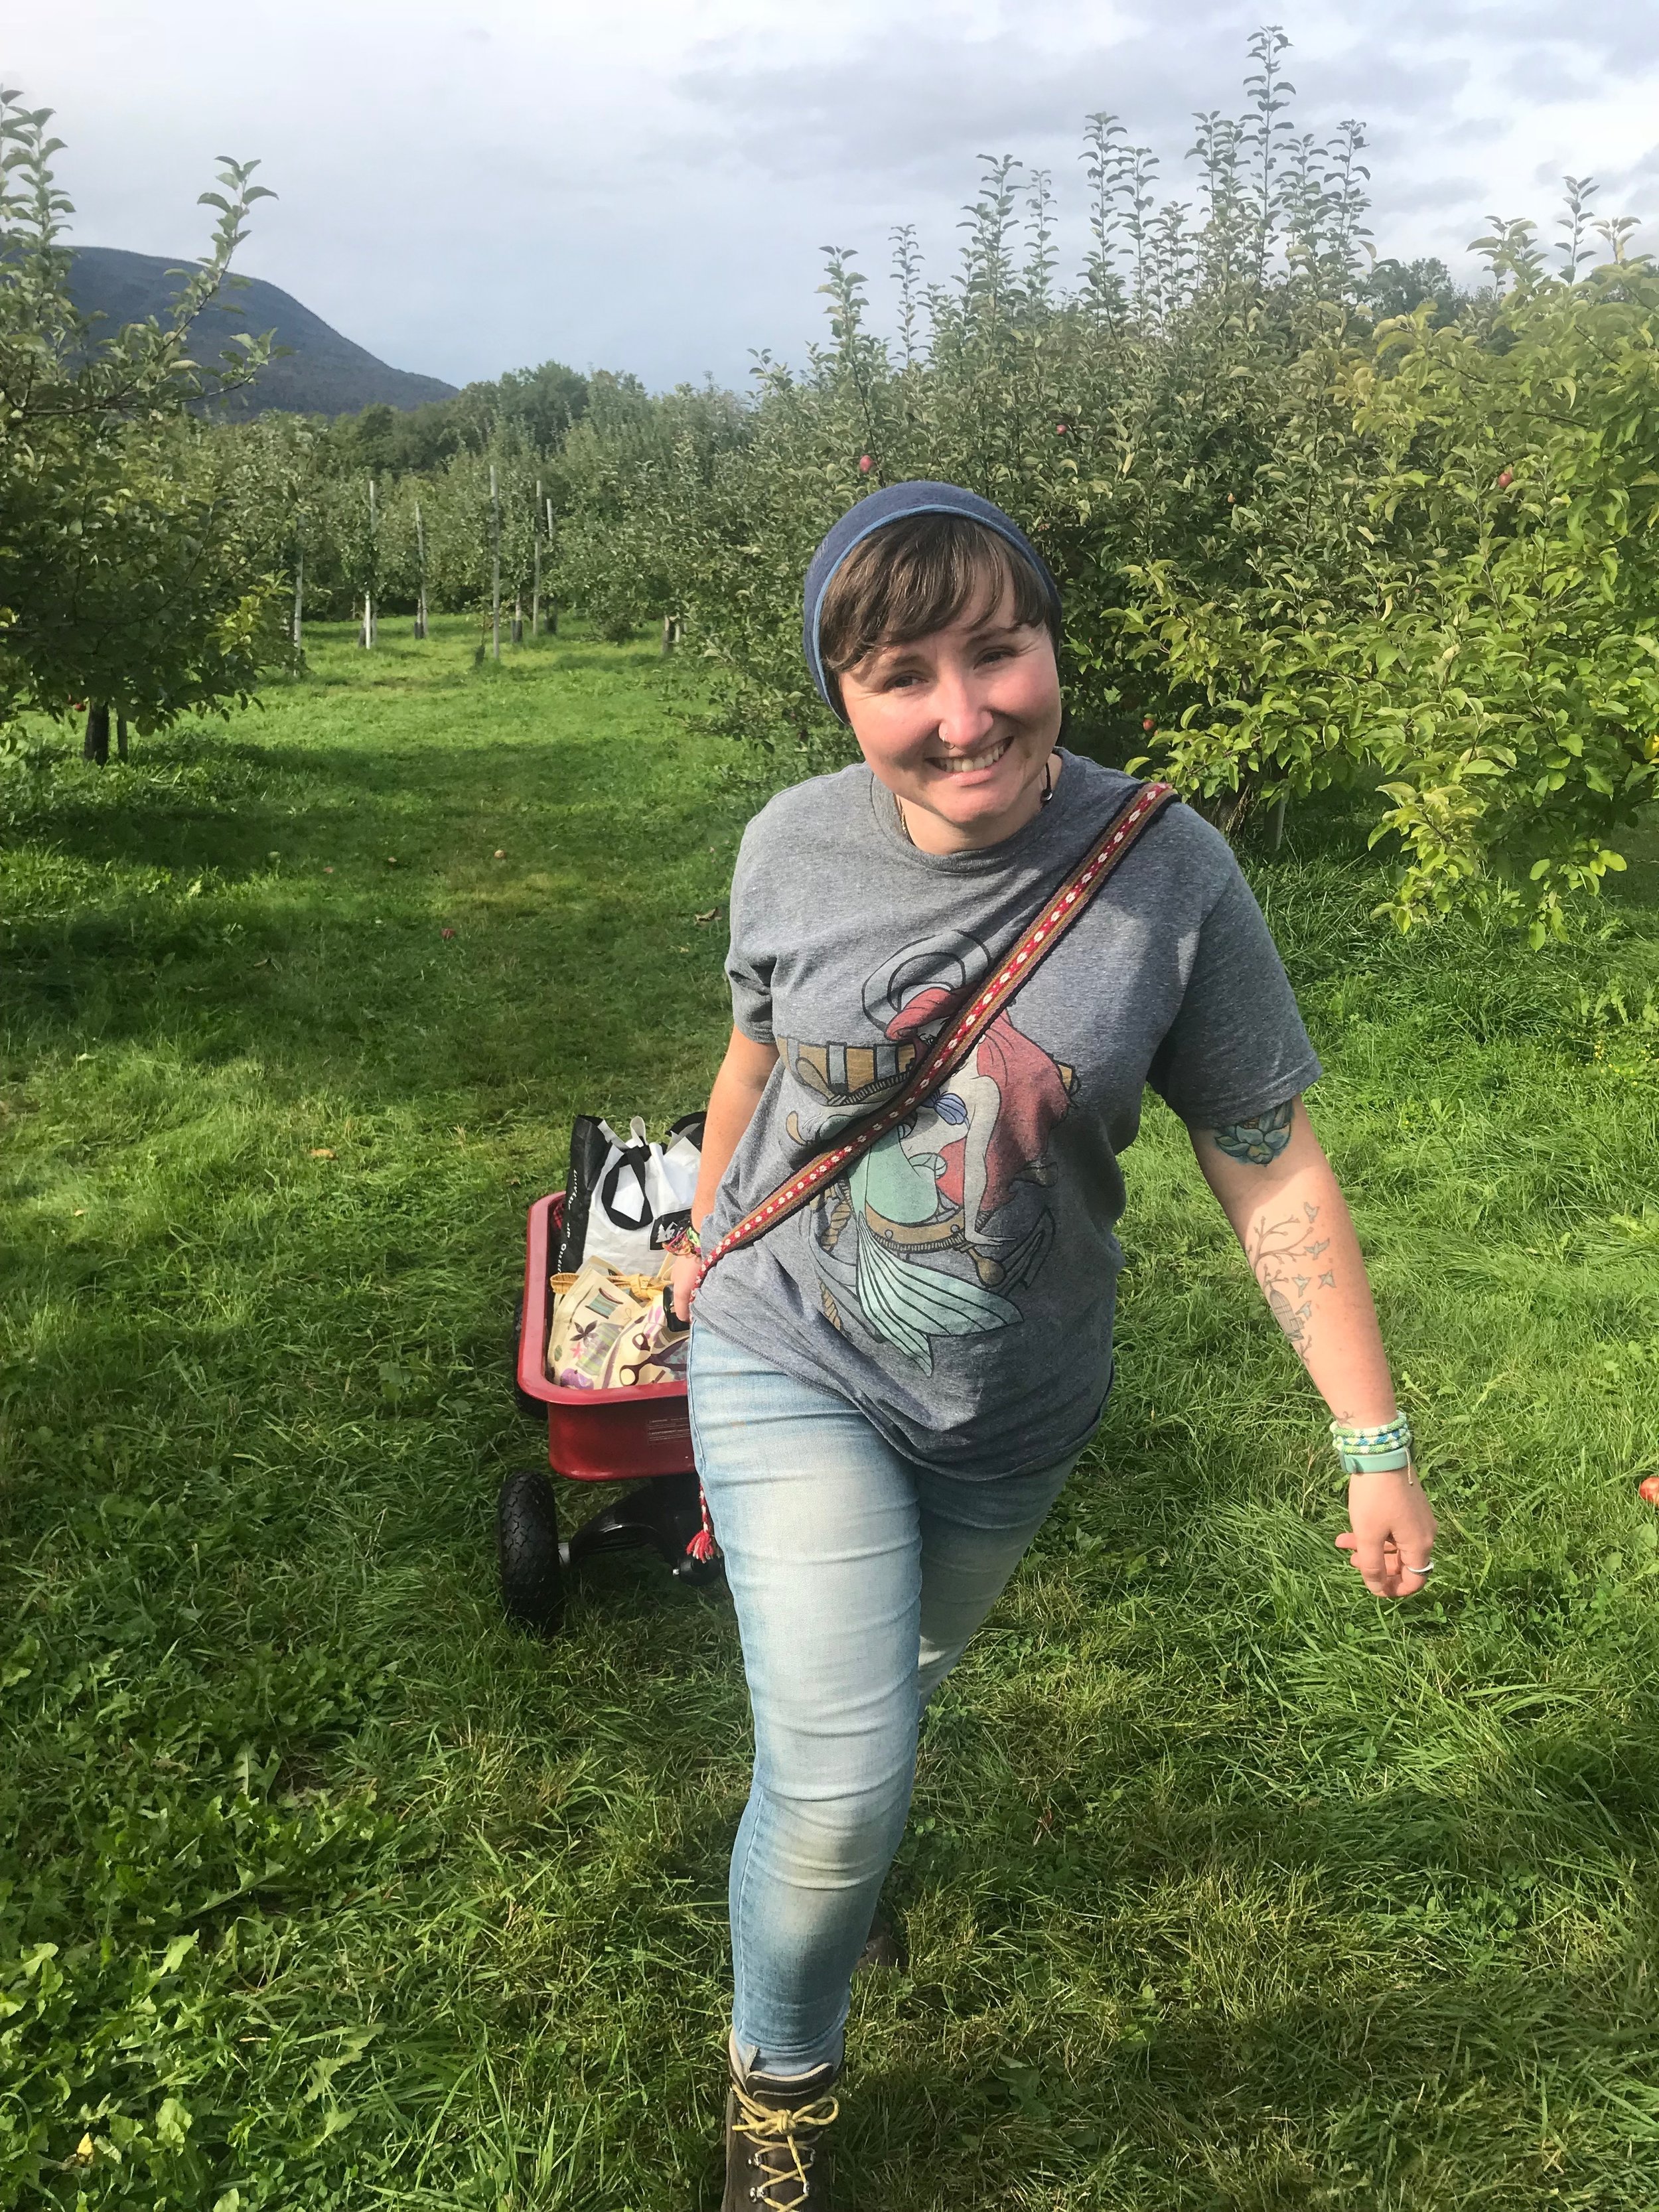  Things to do in Vermont - Apple Picking 